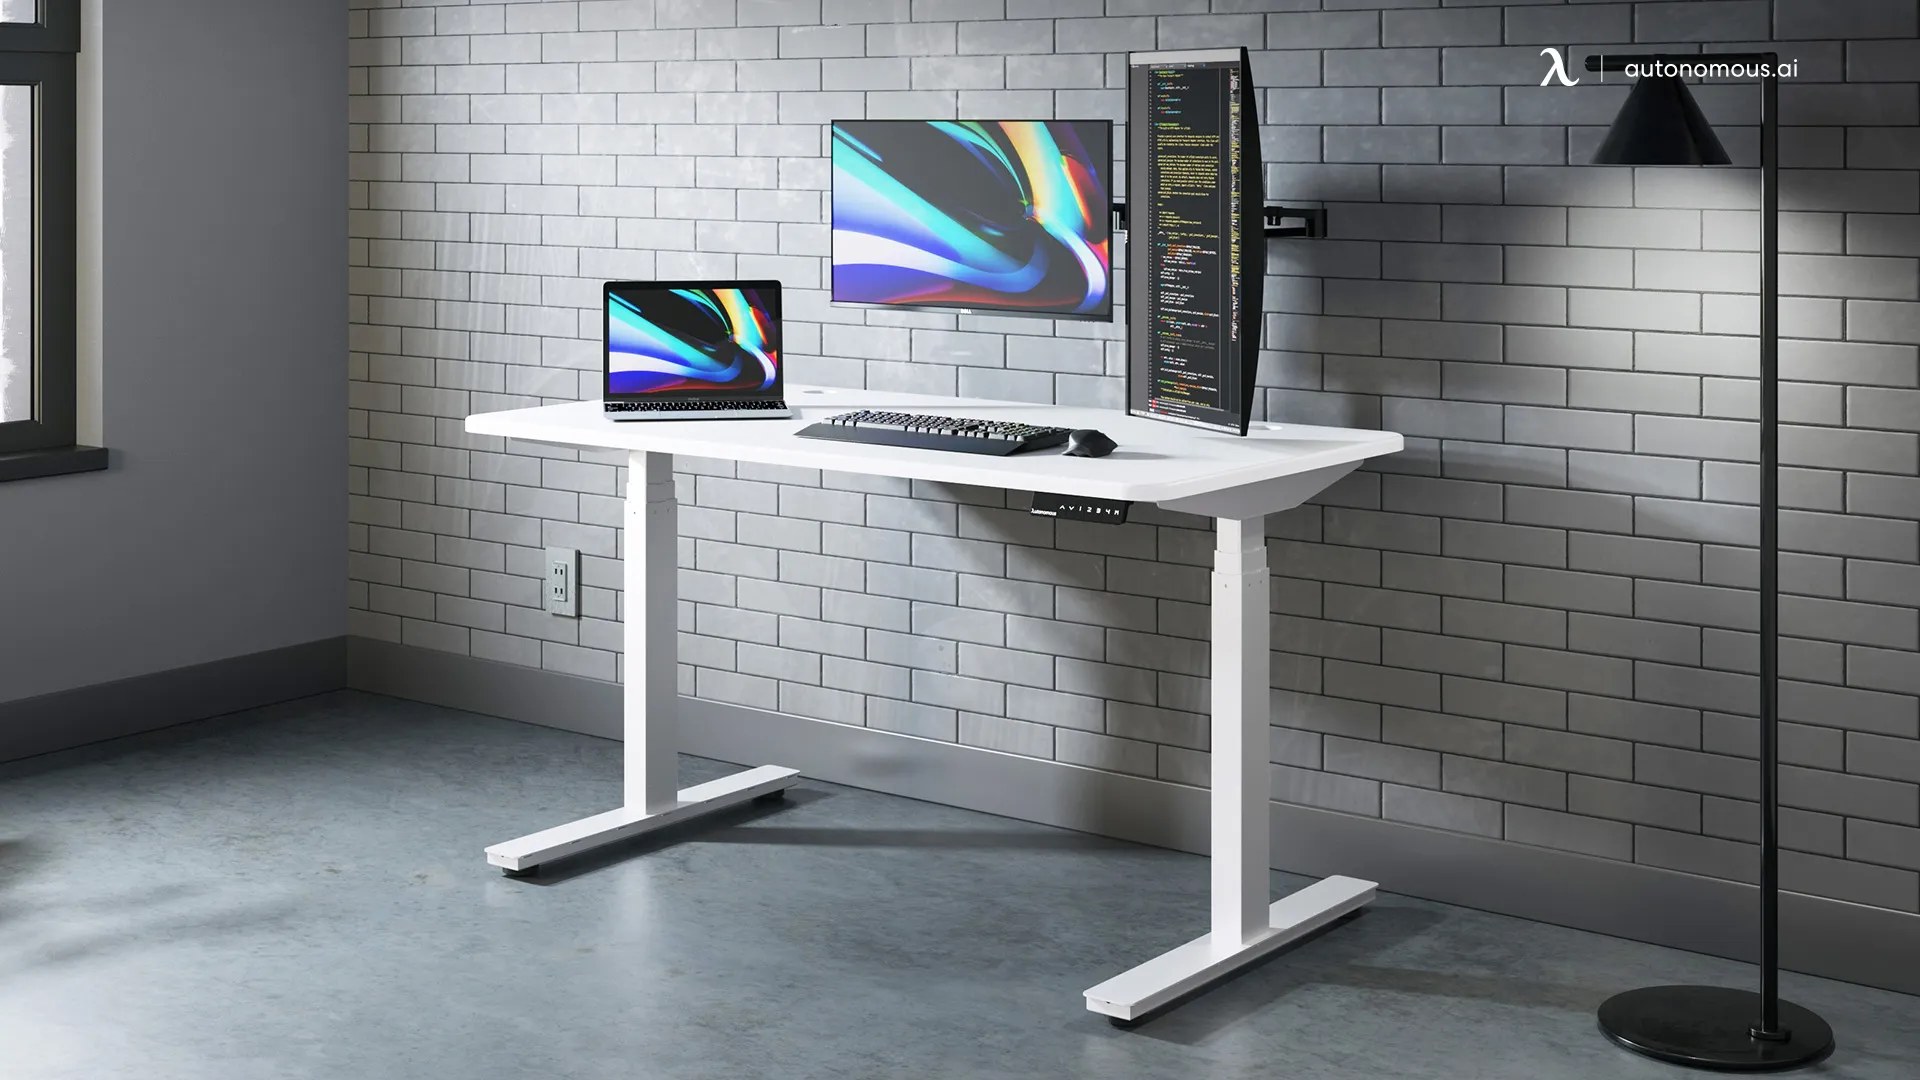 Why choose a standing desk frame over a pre-assembled standing desk?